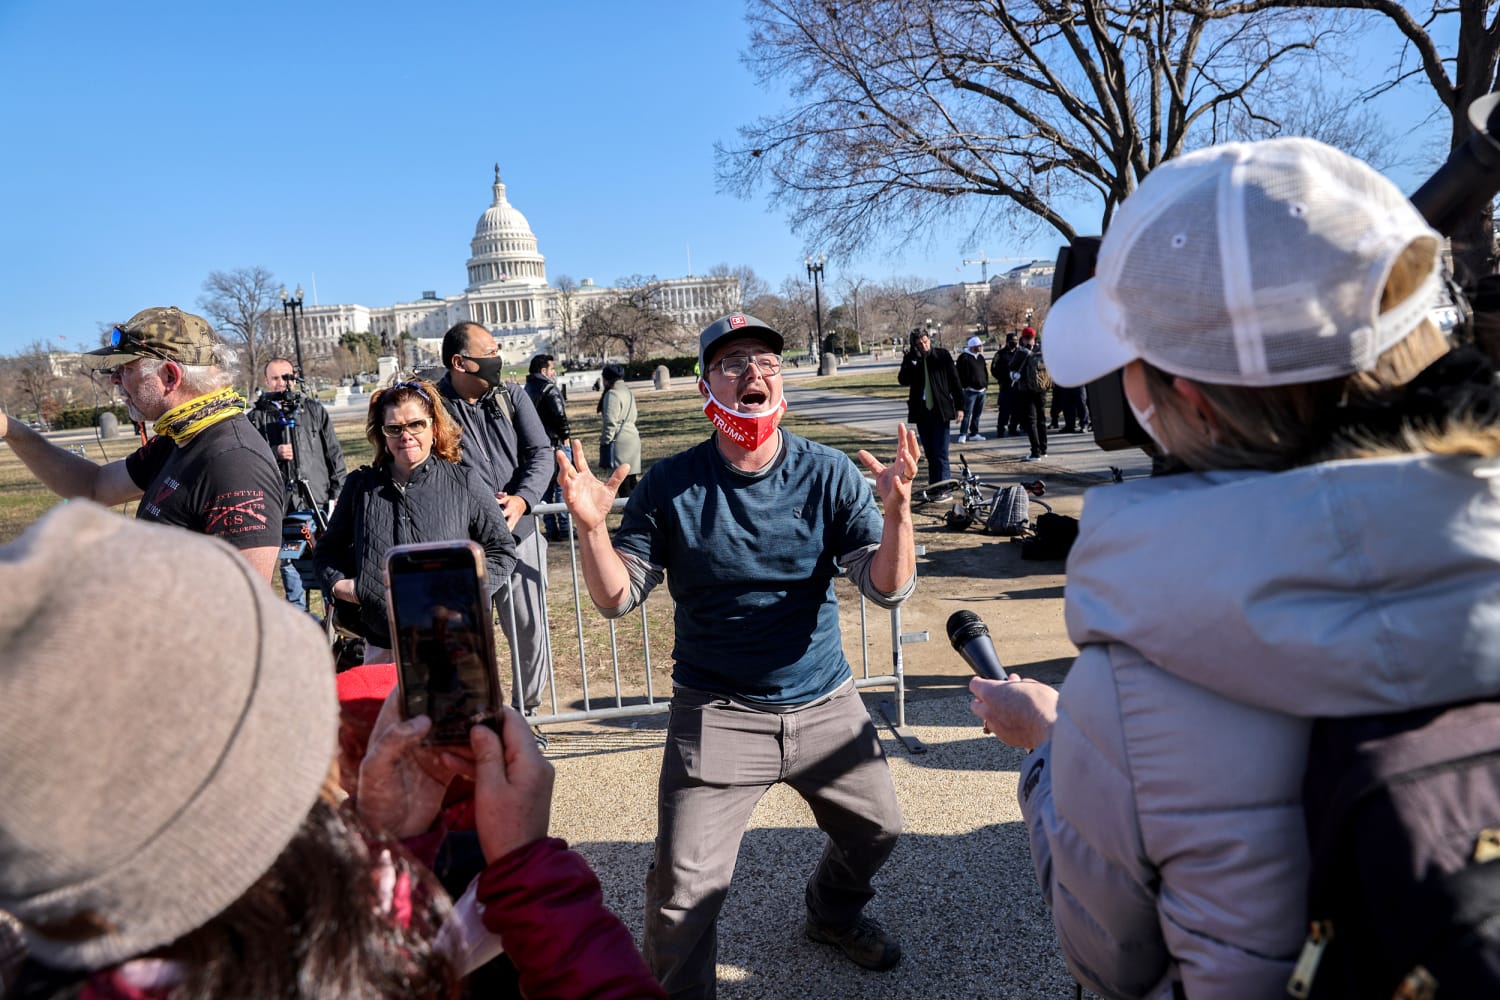 Dejected Trump supporters leave Washington, create new theories for Capitol violence